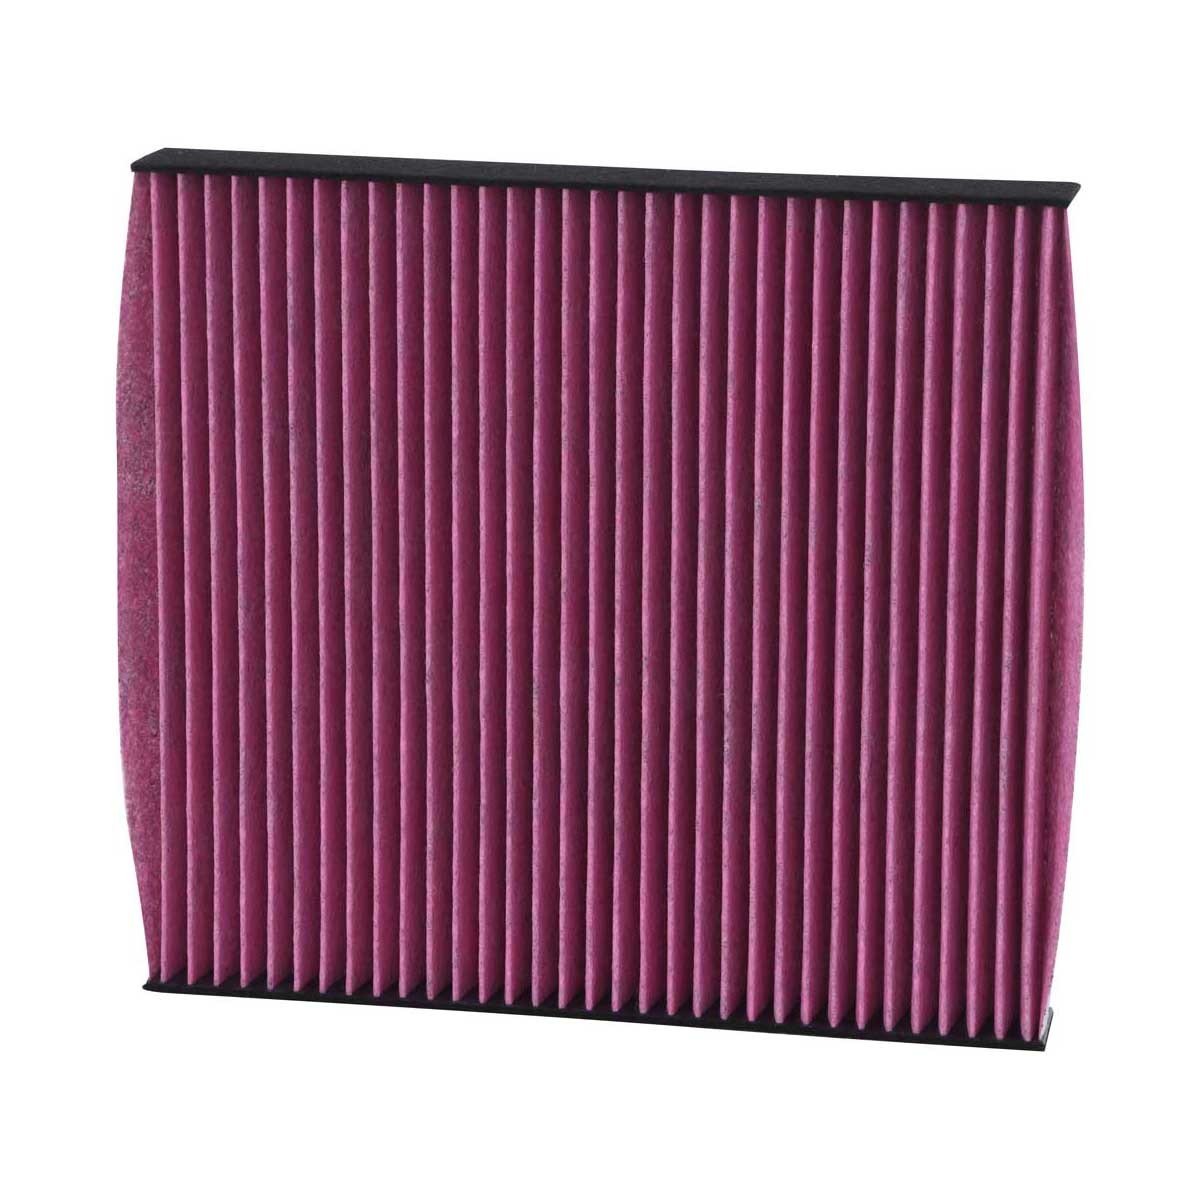 Original K&N Filters Air conditioner filter DVF5001 for AUDI A3